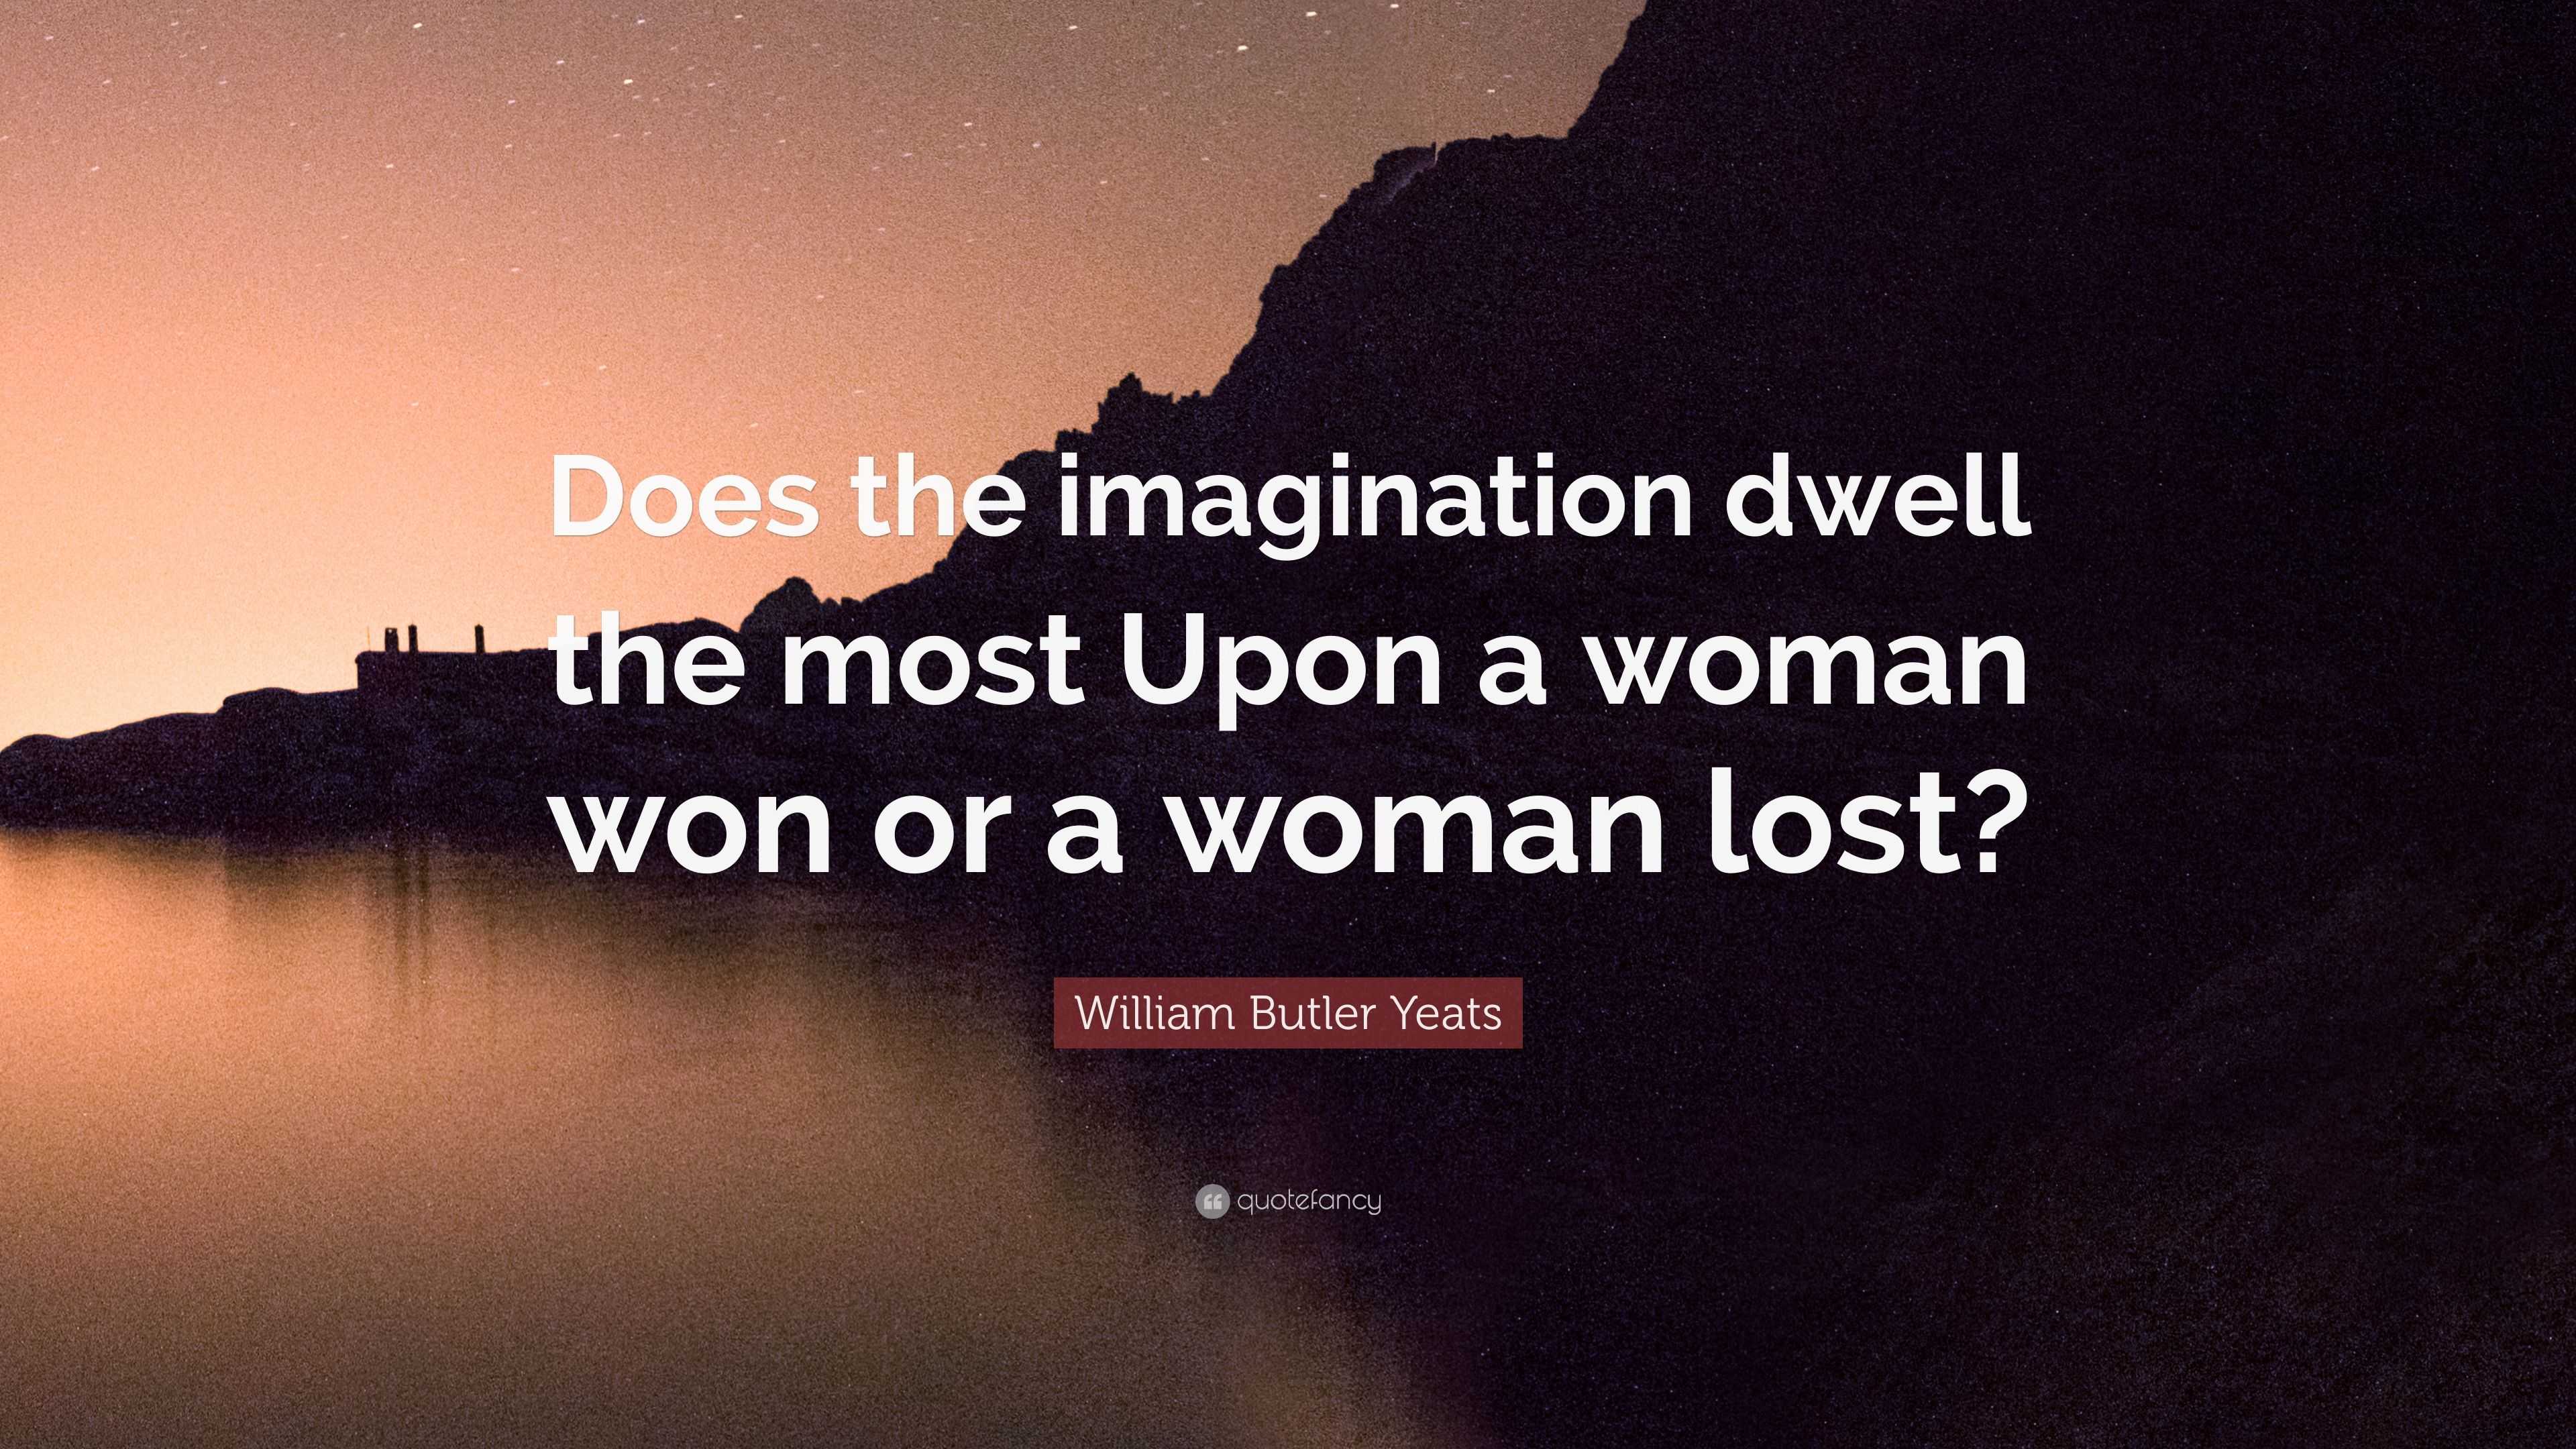 William Butler Yeats Quote: “Does the imagination dwell the most Upon a ...